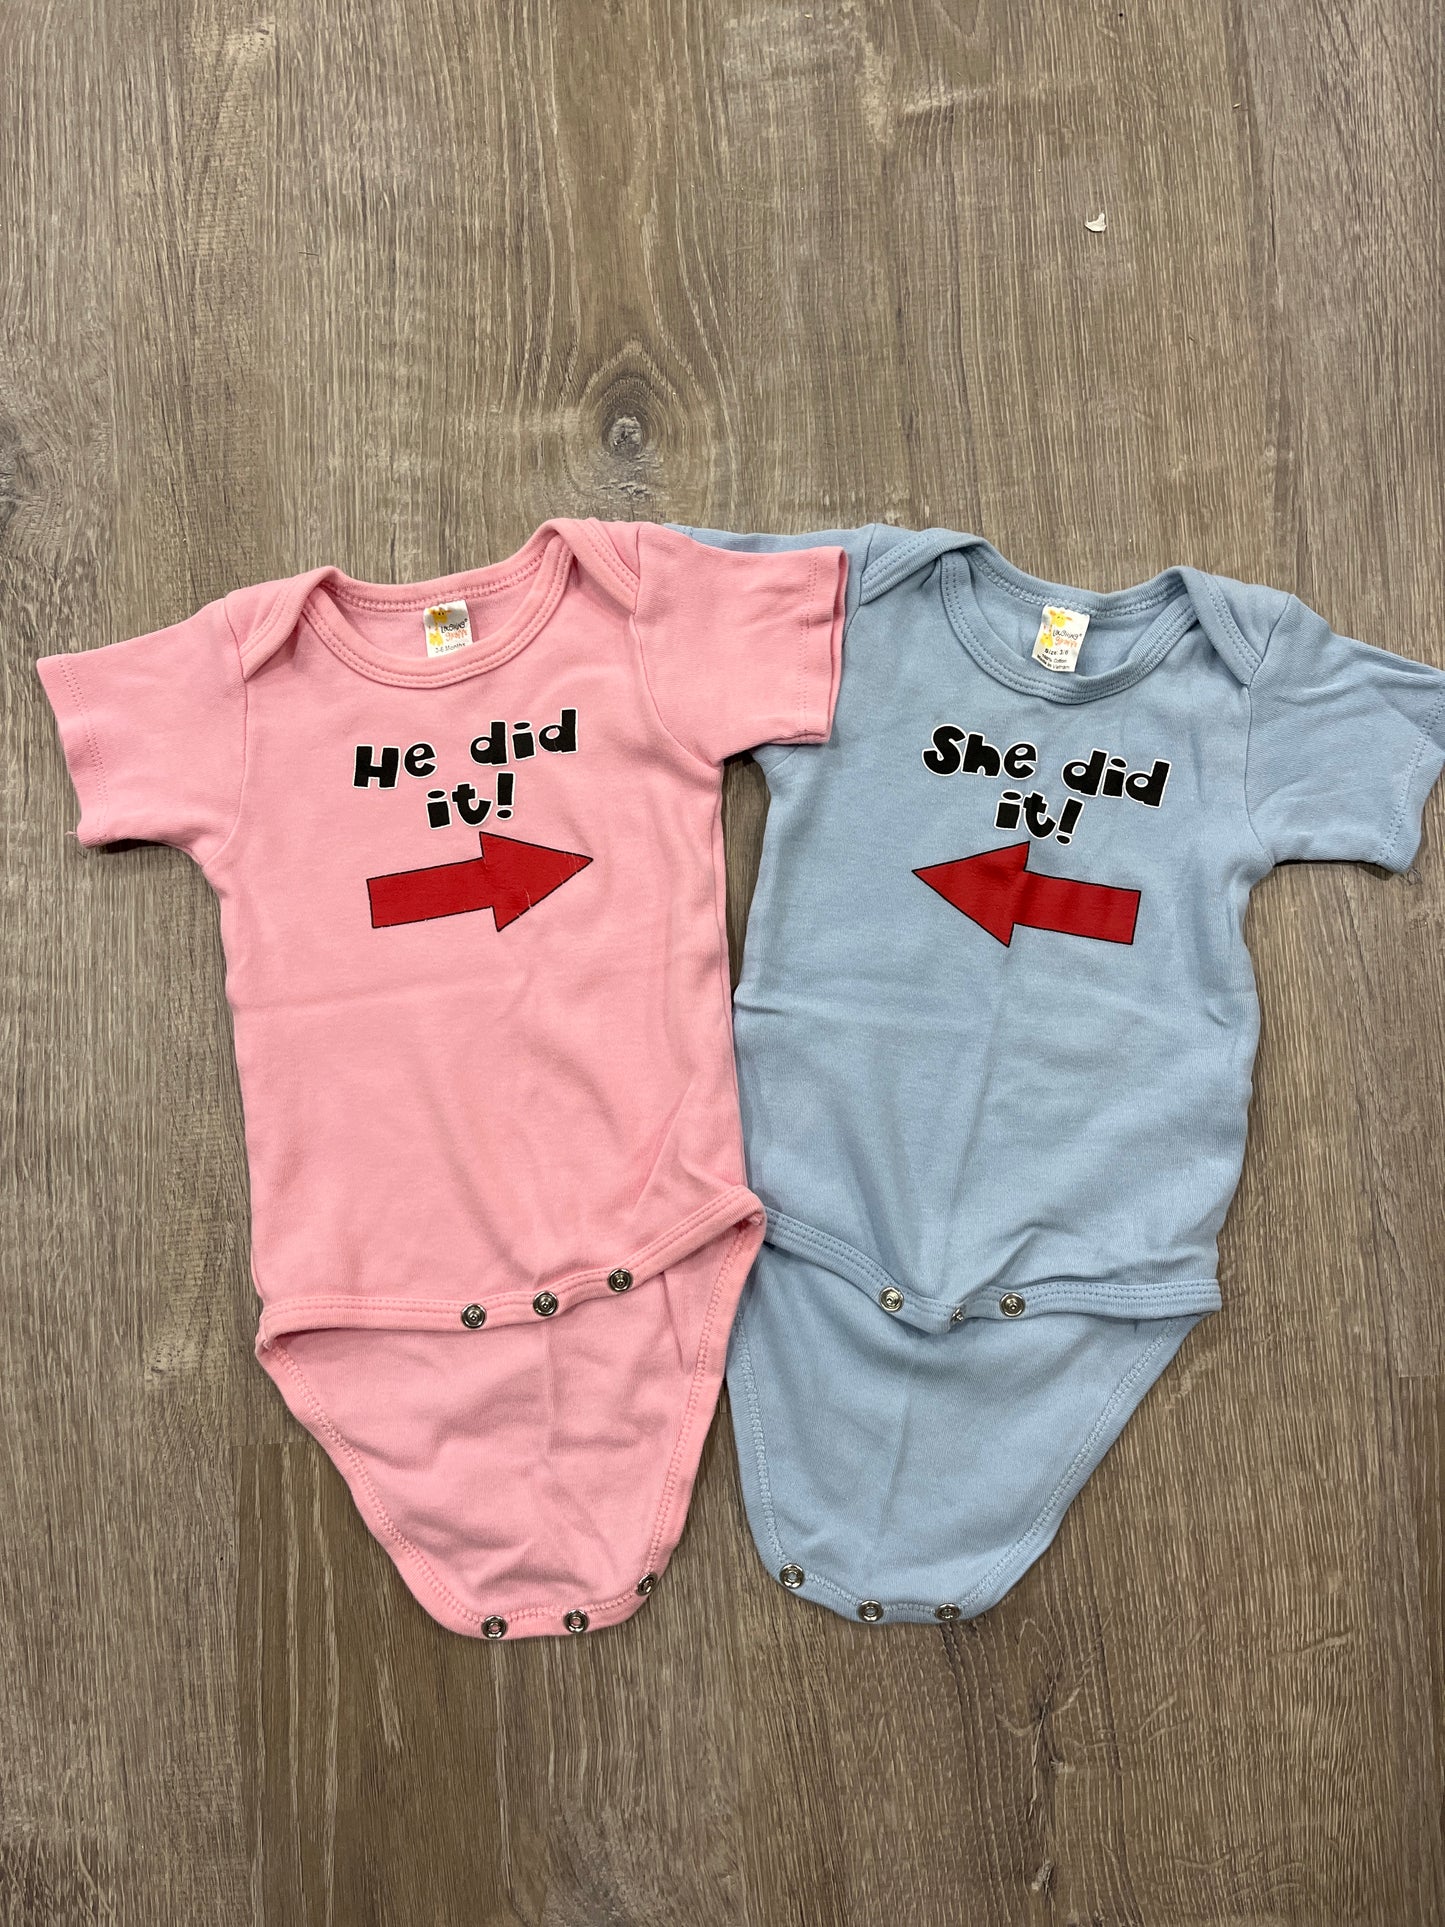 3-6 month twin onesies